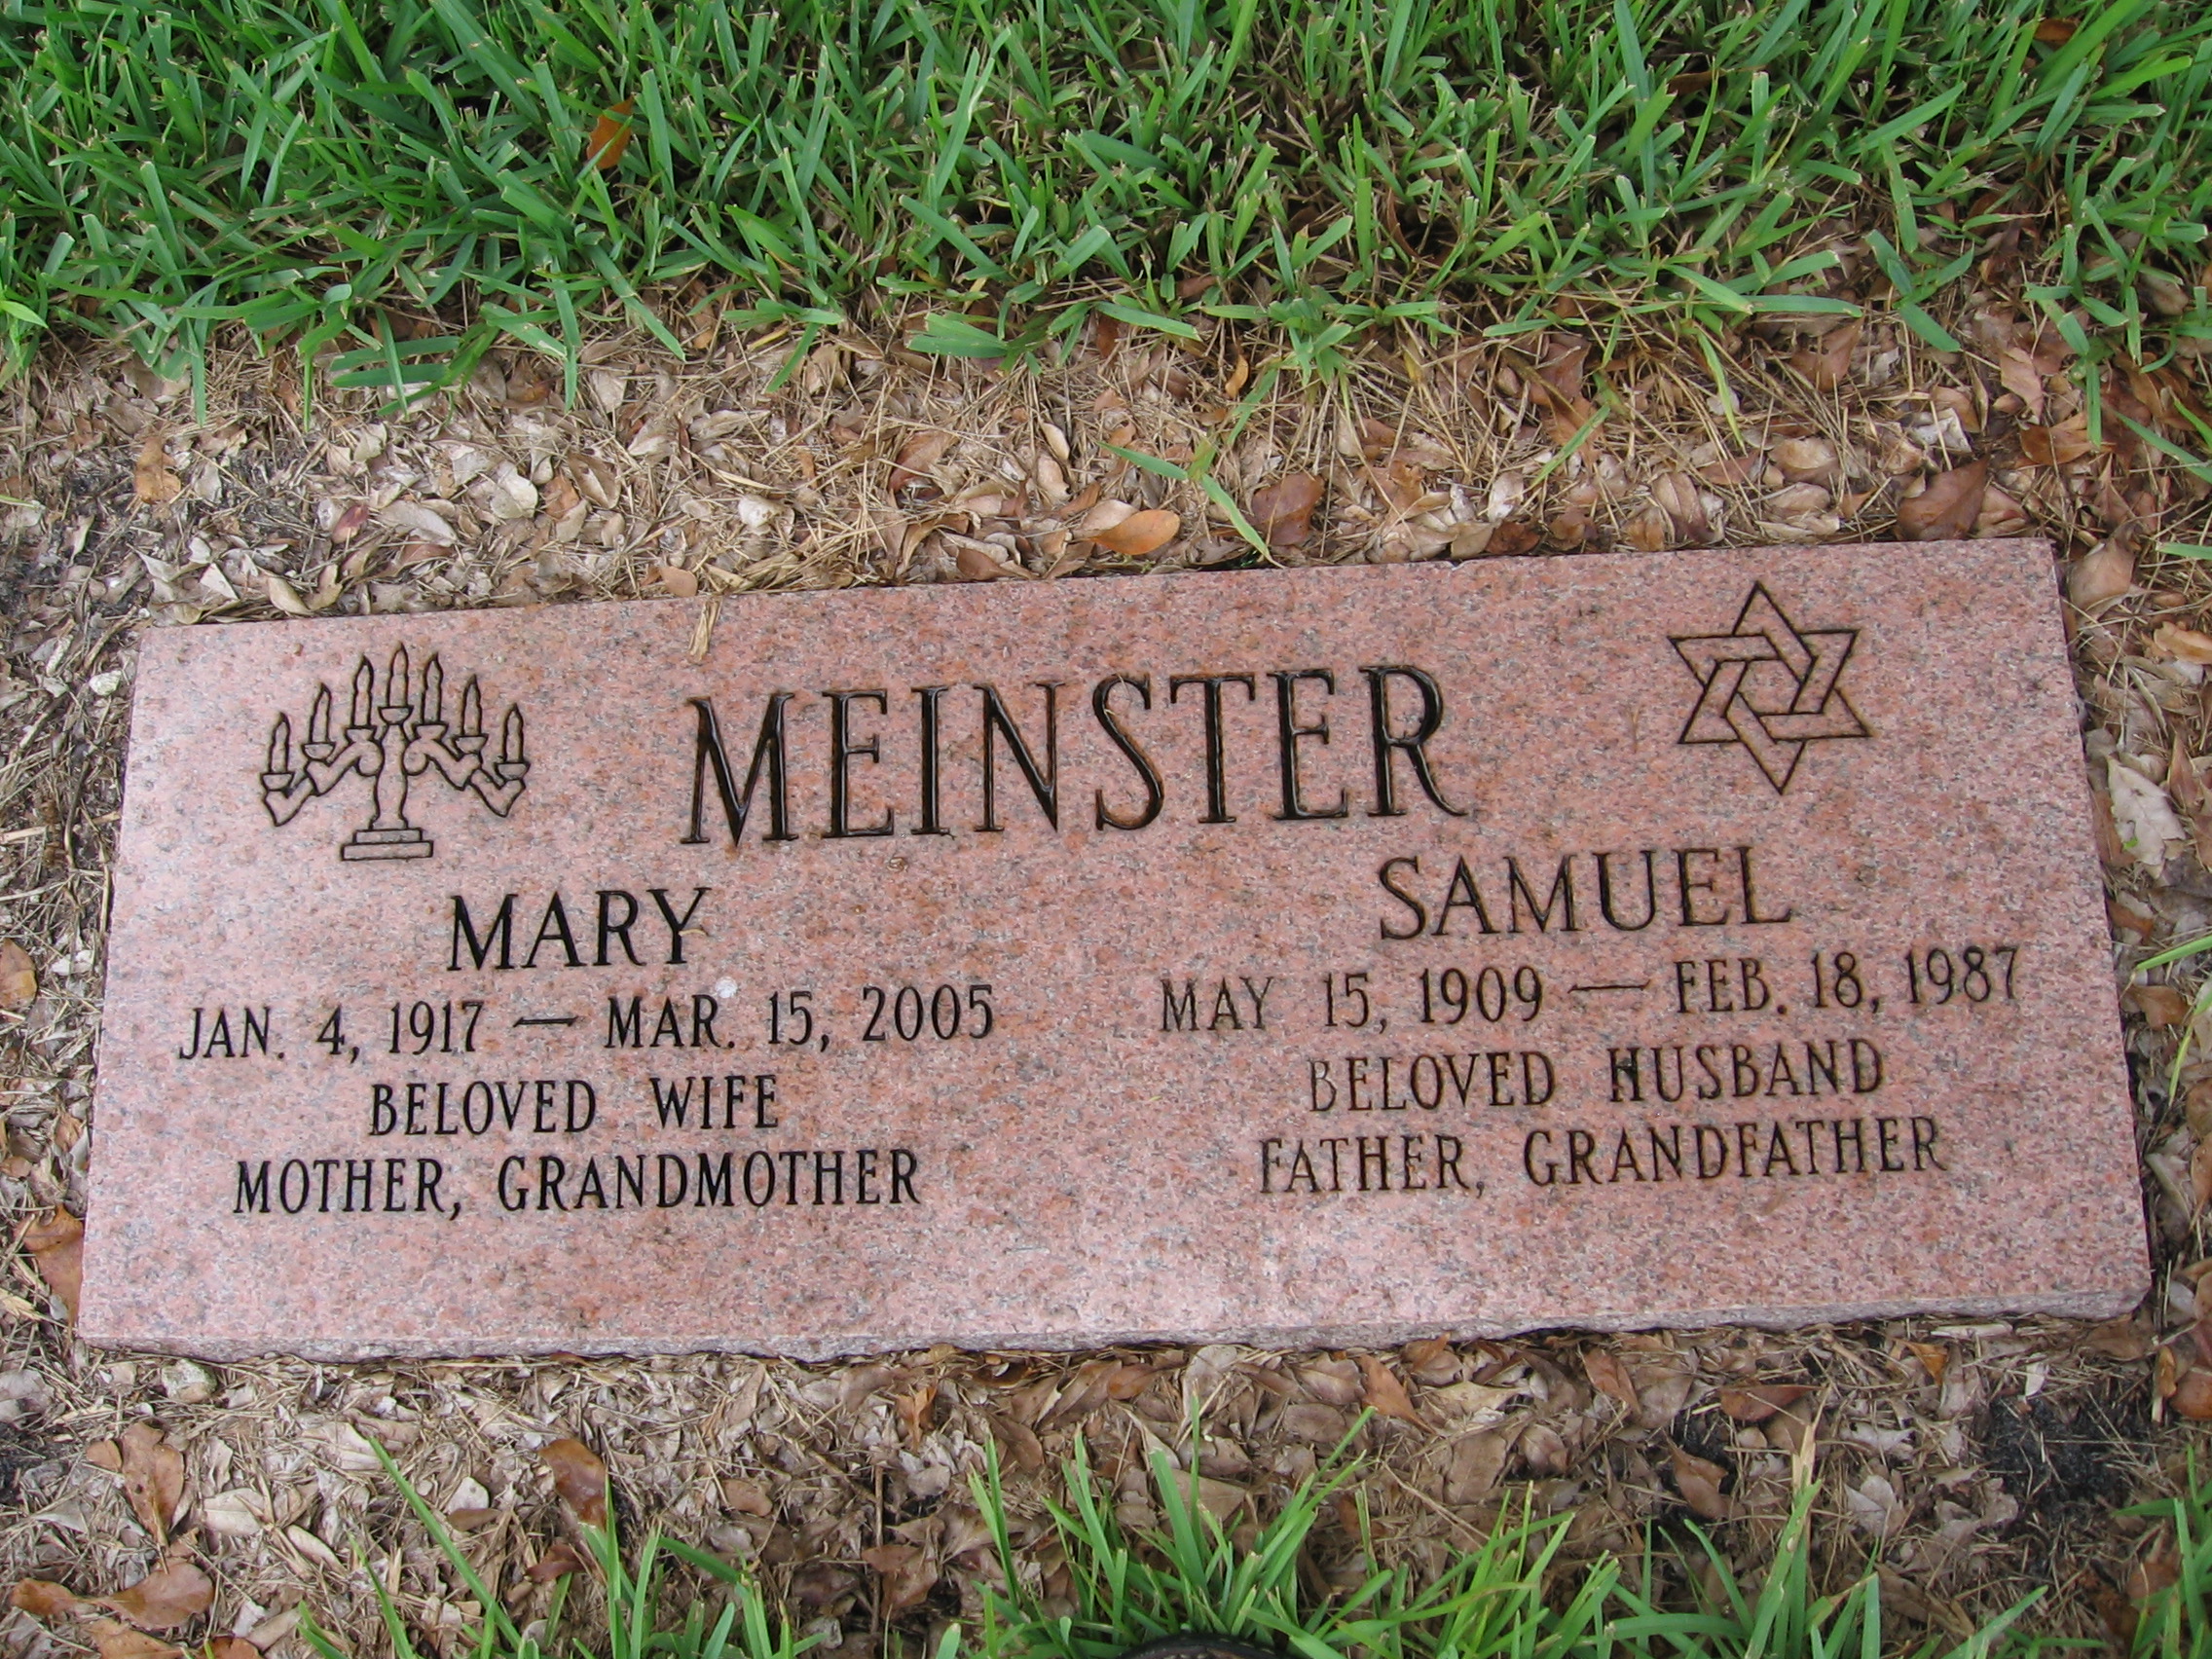 Mary Meinster